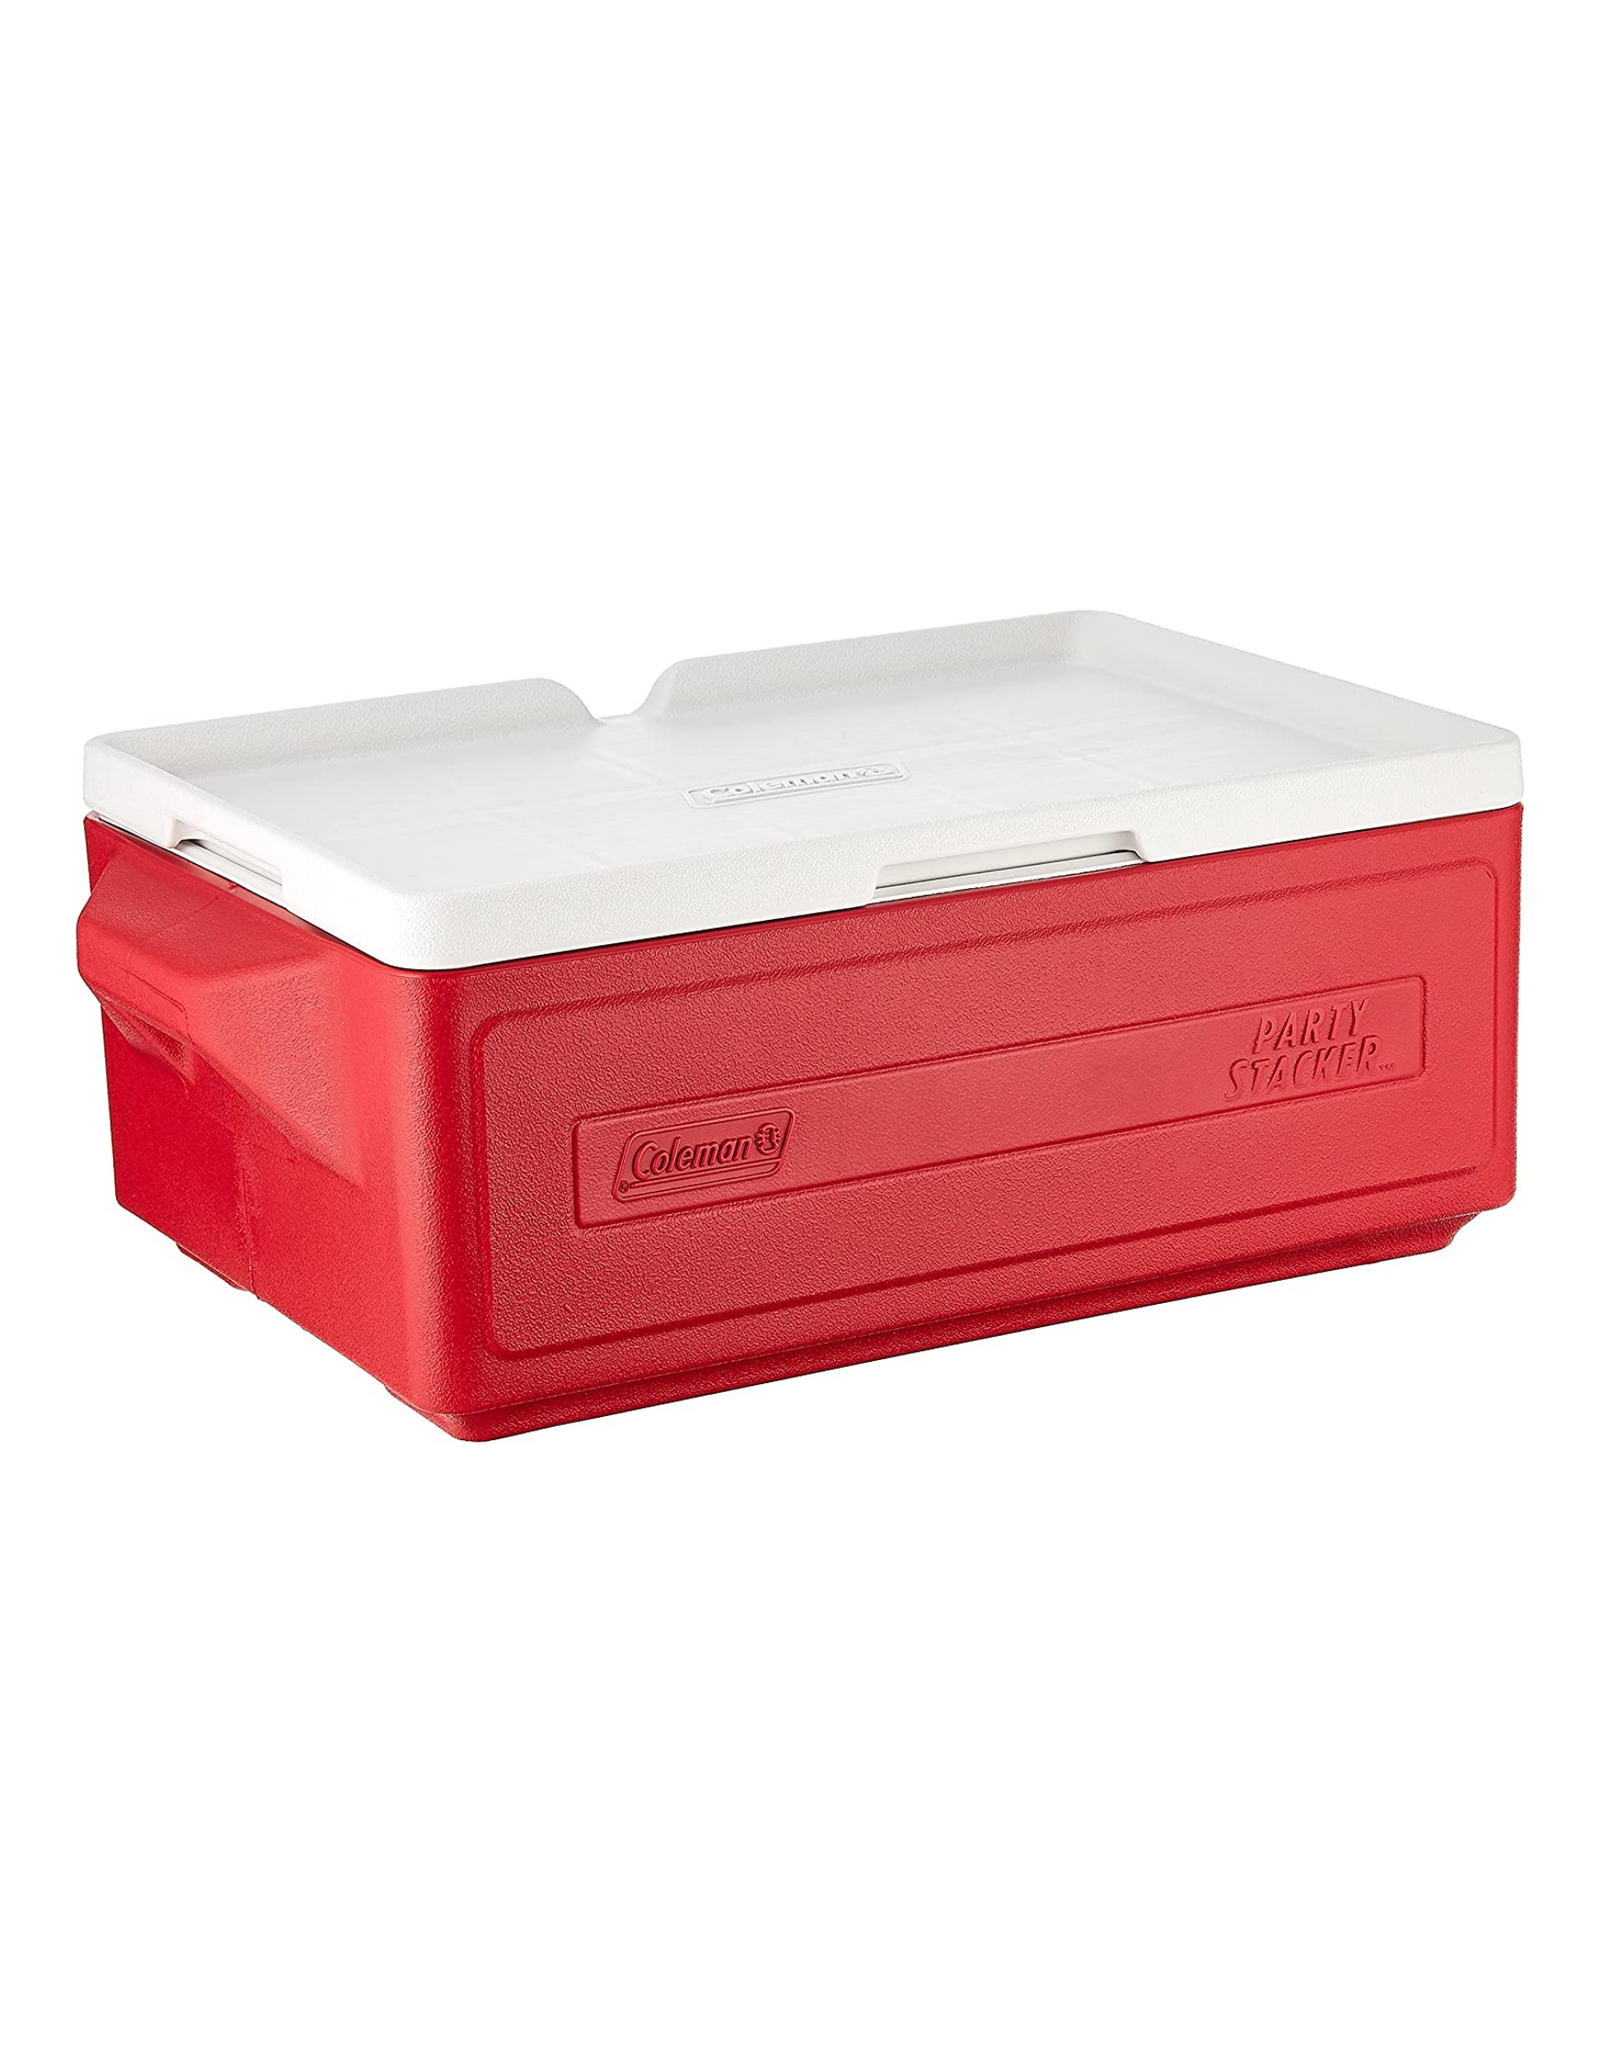 Coleman 24-Can Party Stacker Portable Cooler, 25 Quarts, Red